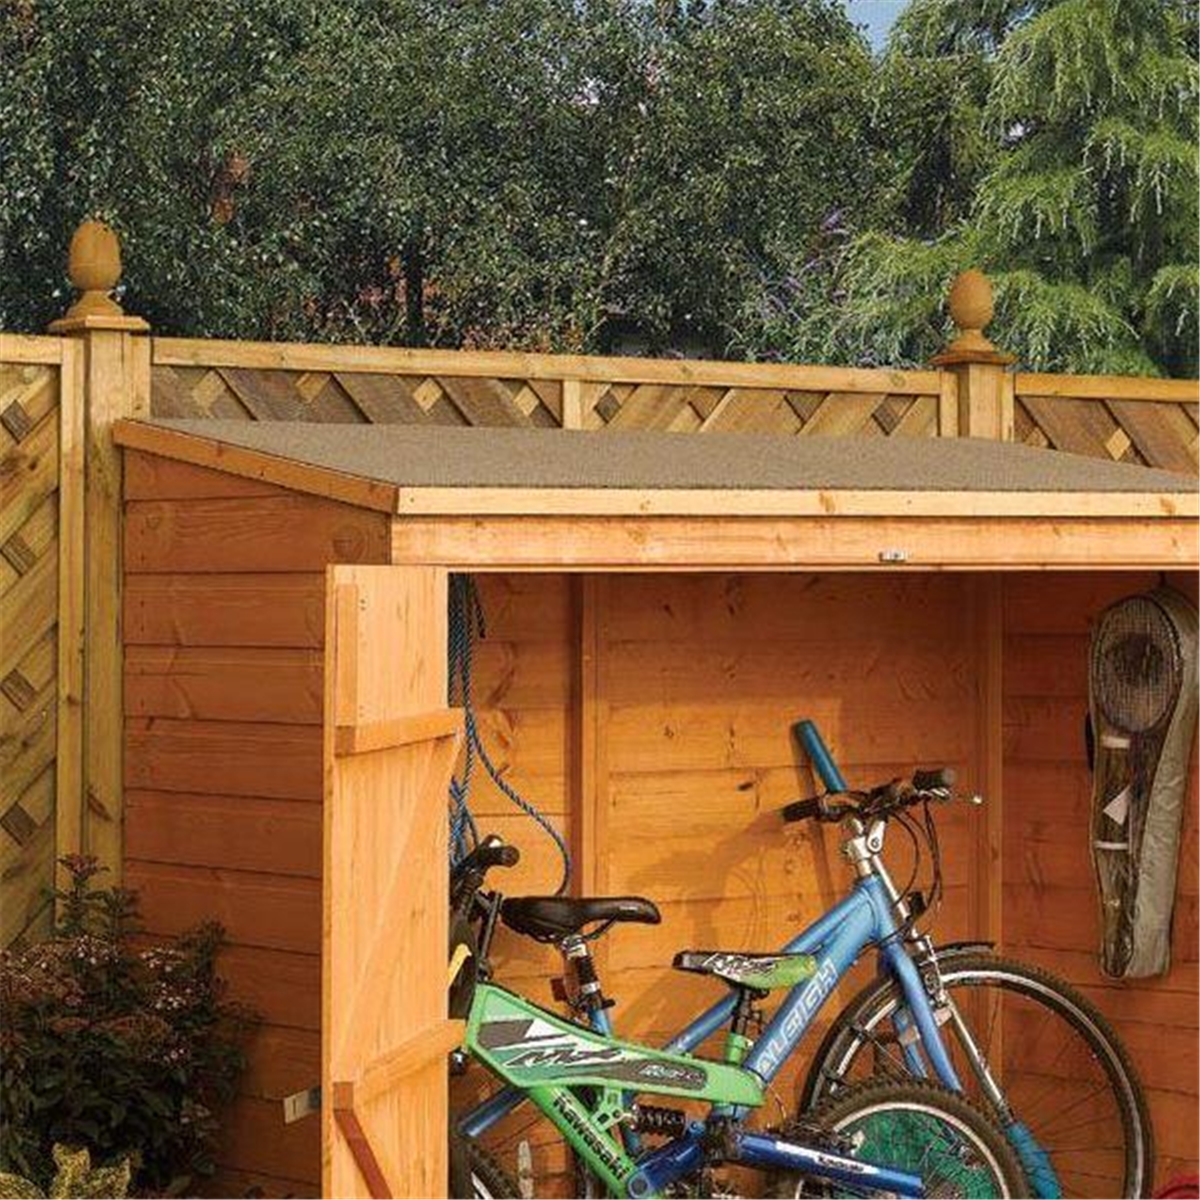 6 x 3 tongue and groove wallstore / bike shed 1825mm x